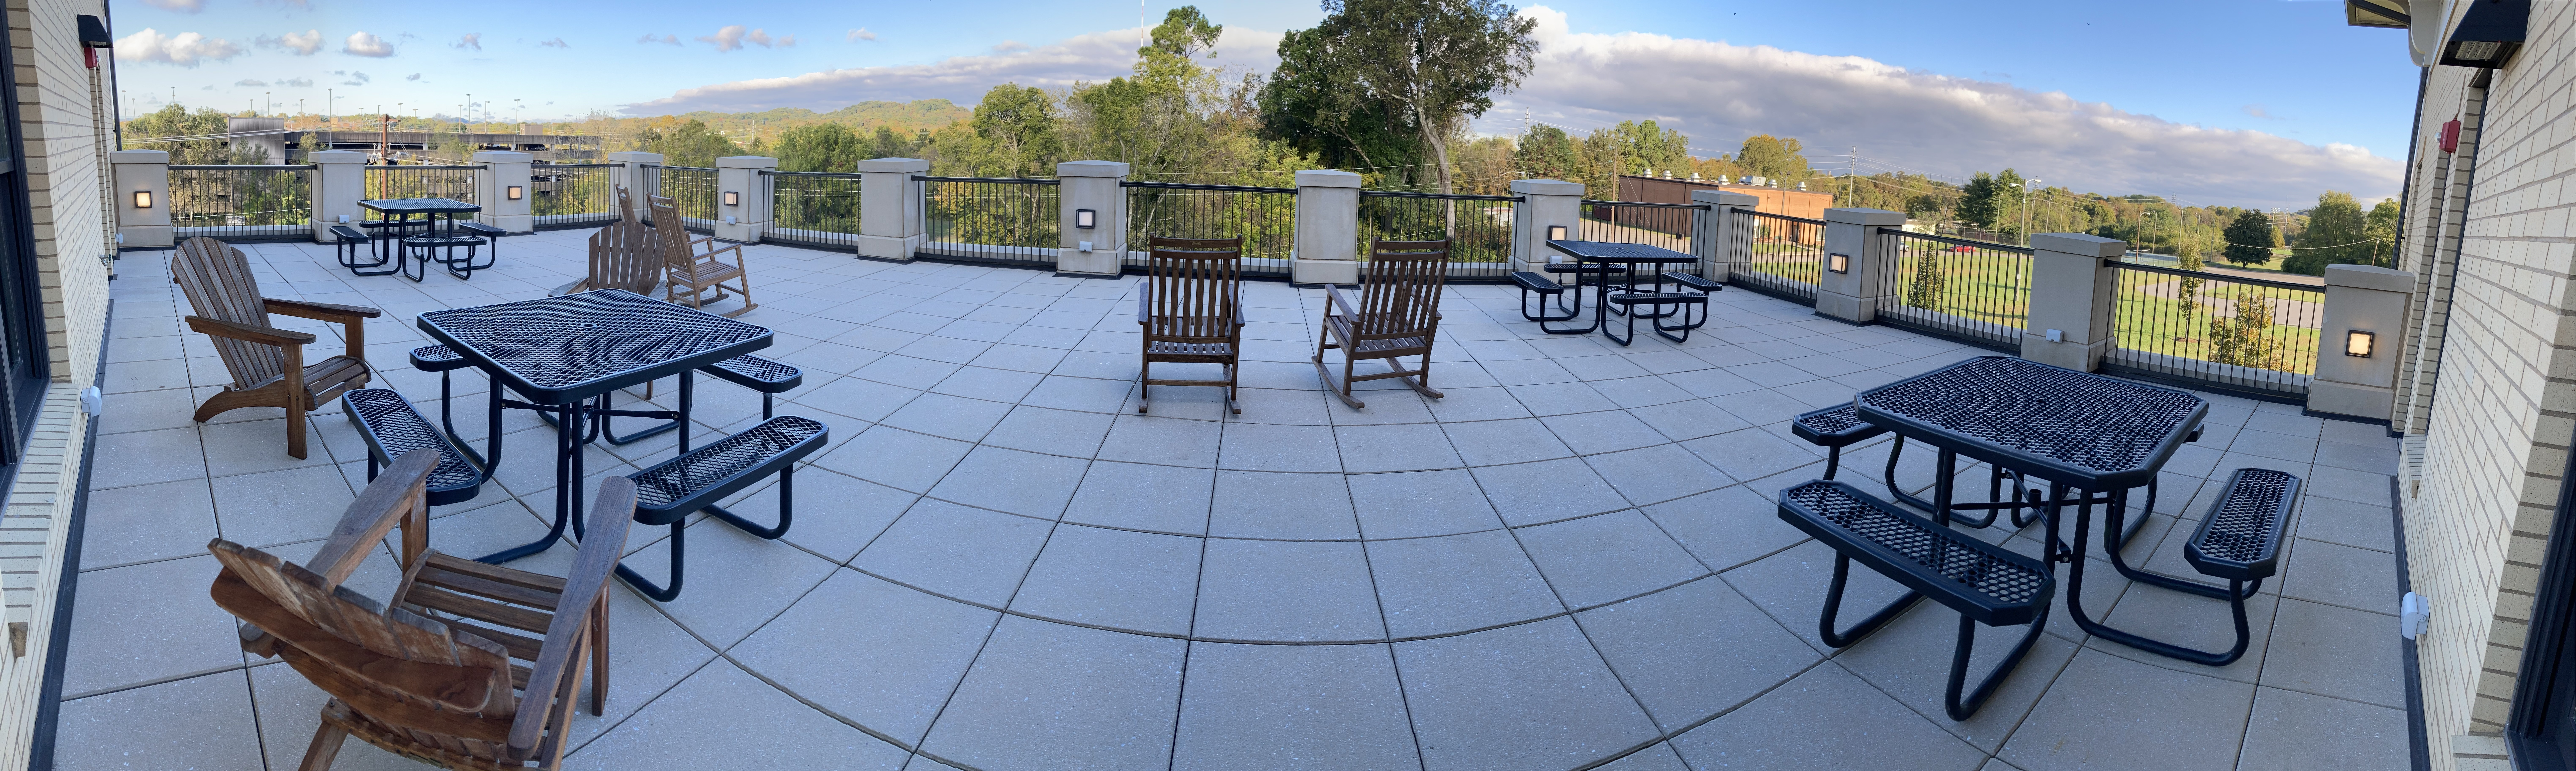 Siena Hall Conference Center - 3rd Floor Patio